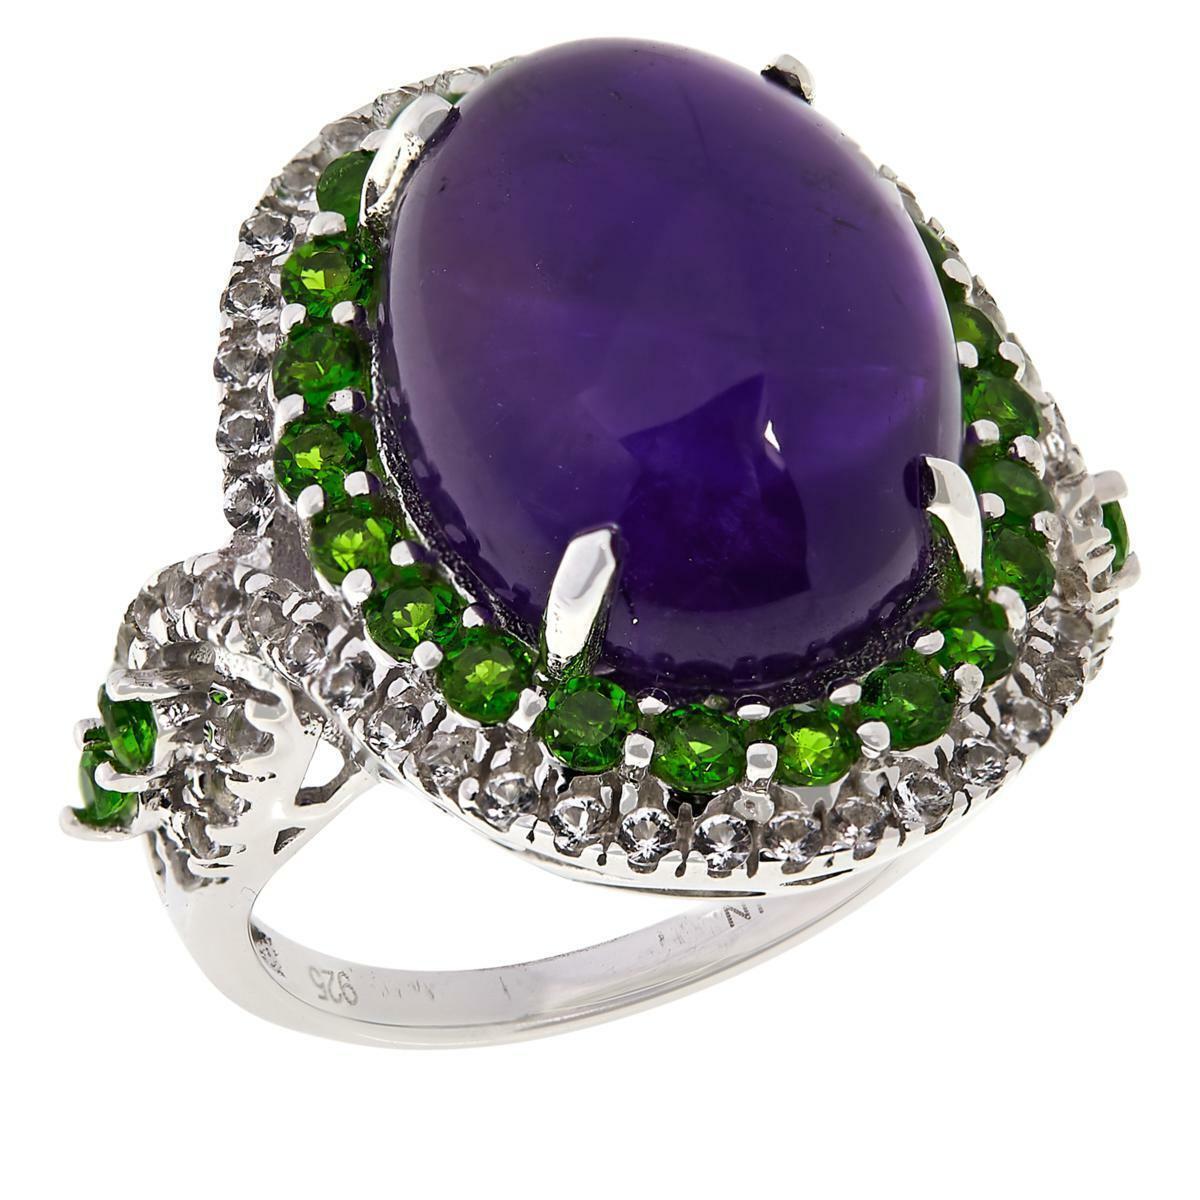 Colleen Lopez Amethyst, Chrome Diopside and White Topaz Ring, Size 7